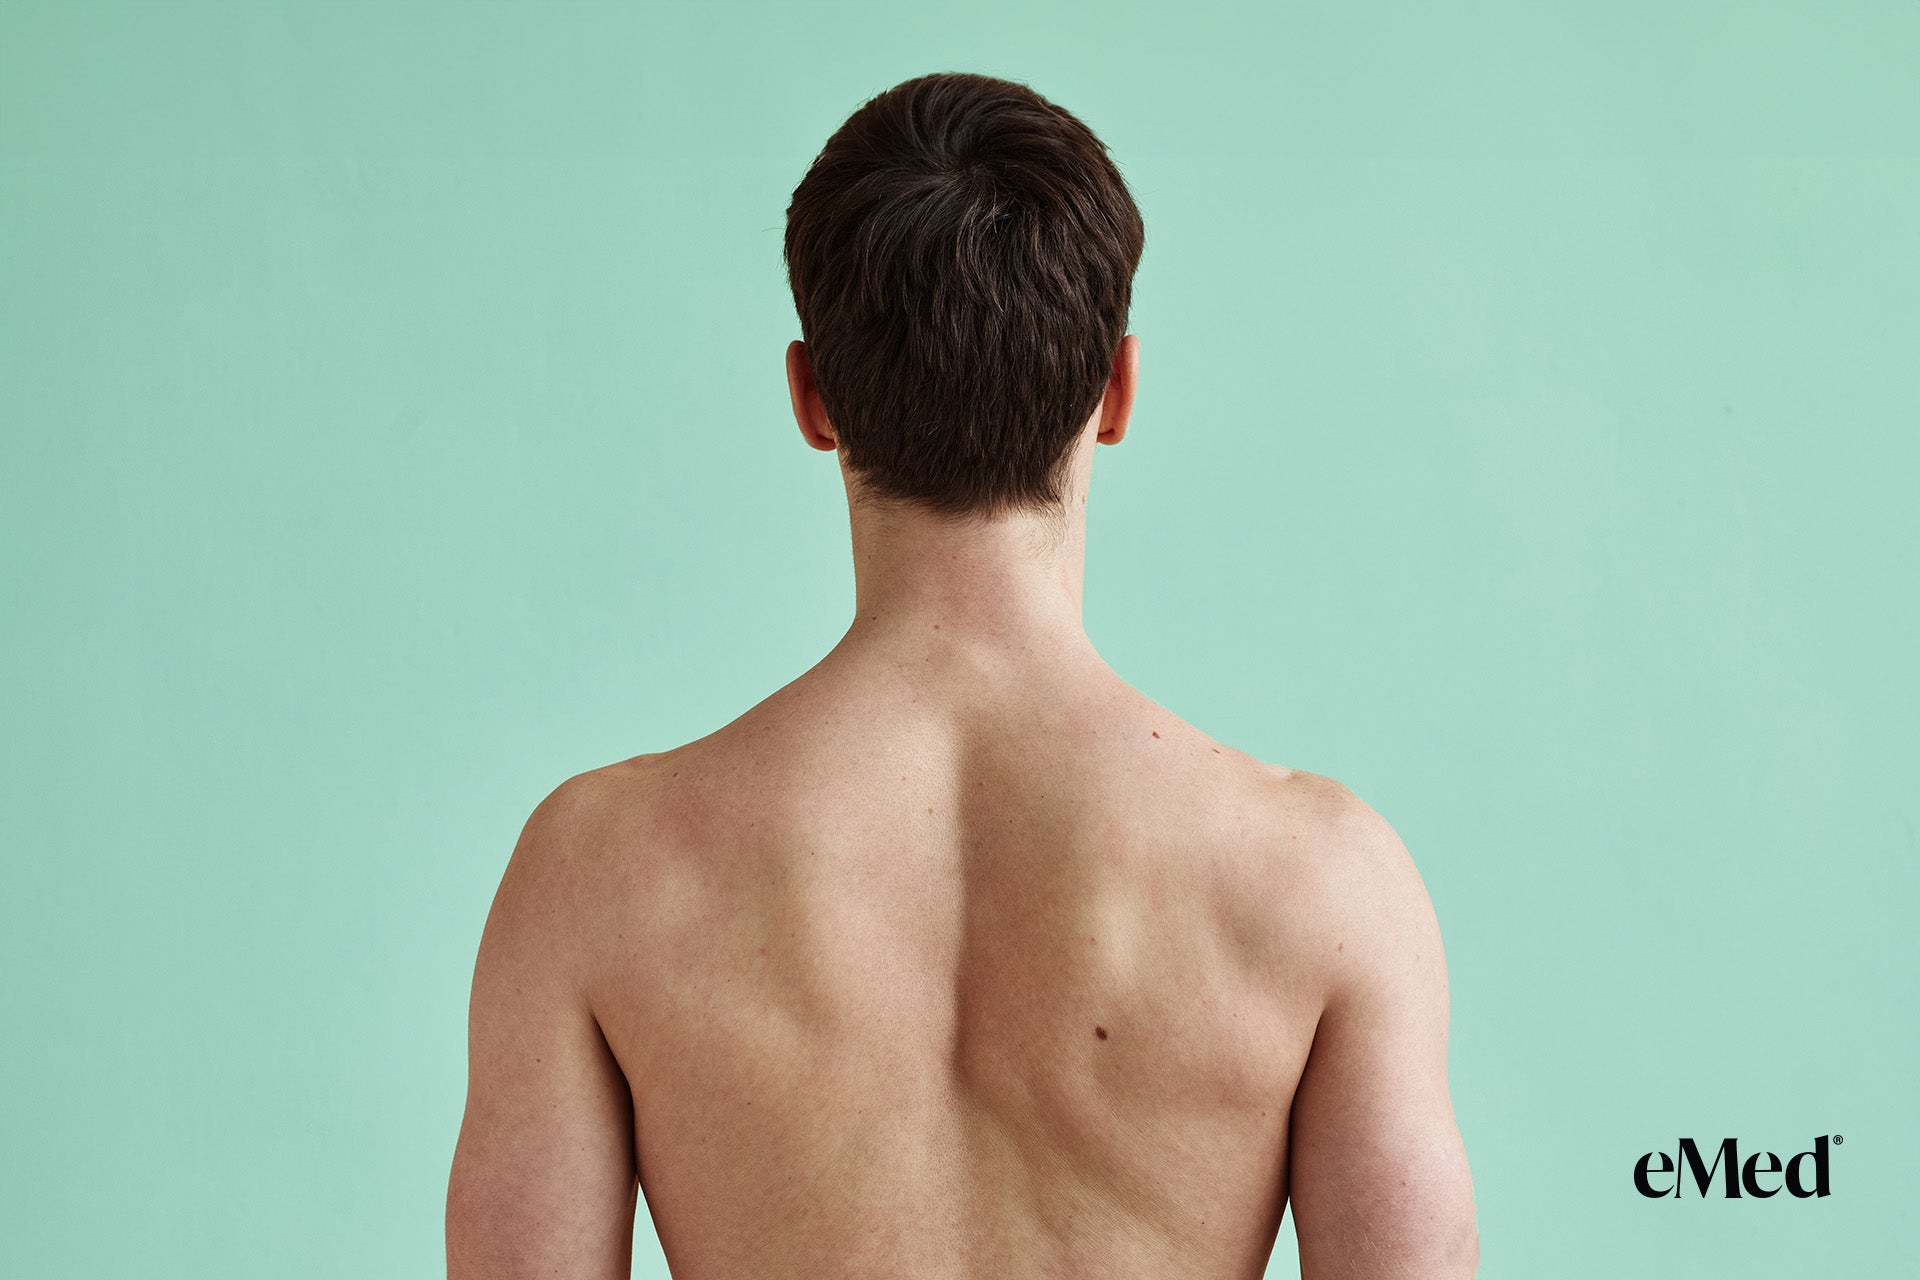 A person after physiotherapy exercises designed to relieve upper back pain